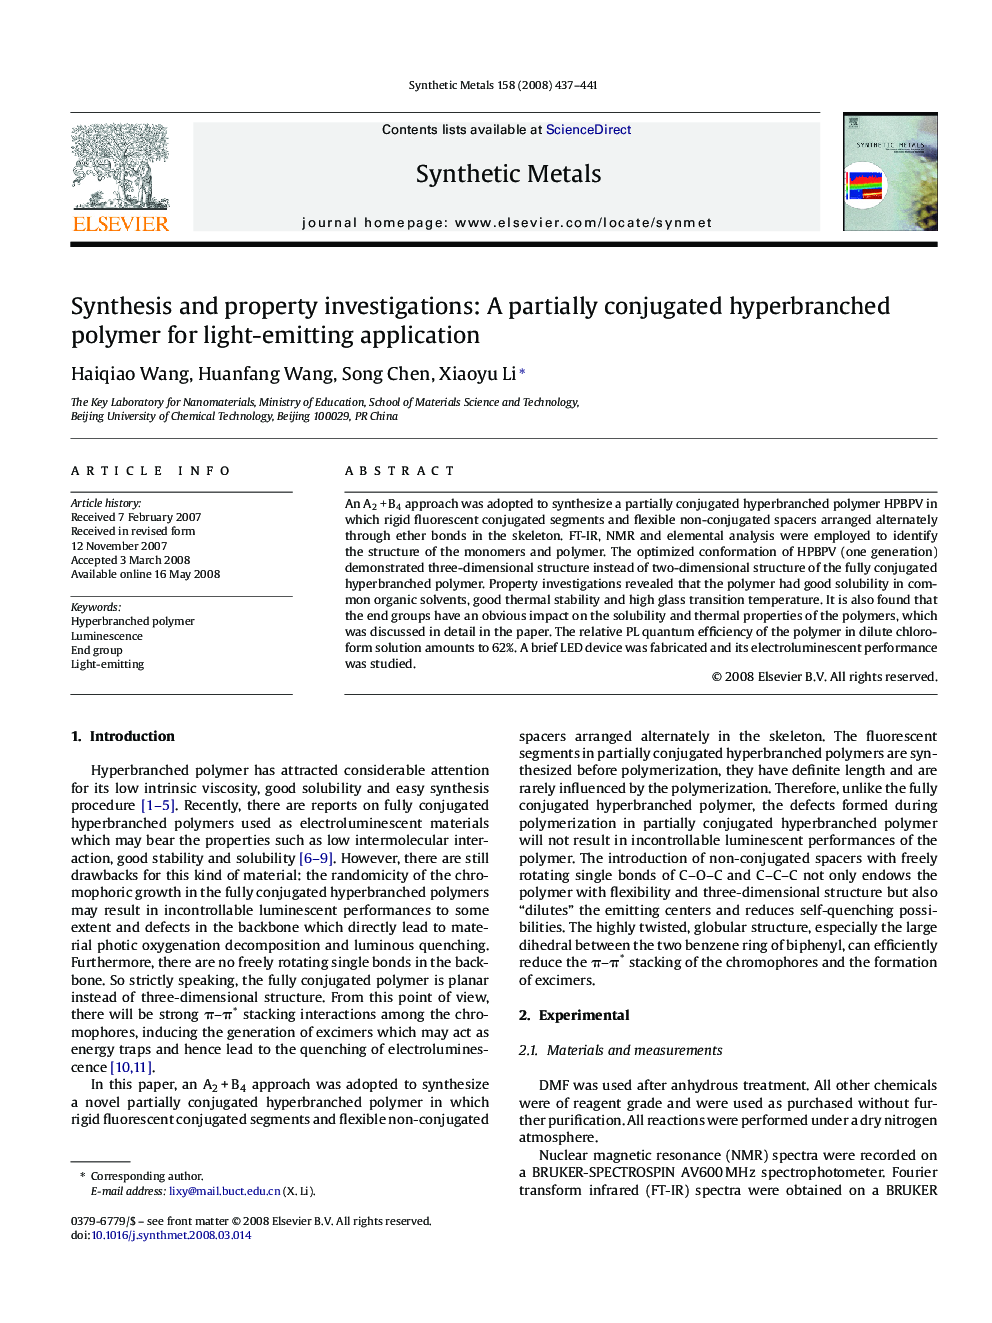 Synthesis and property investigations: A partially conjugated hyperbranched polymer for light-emitting application